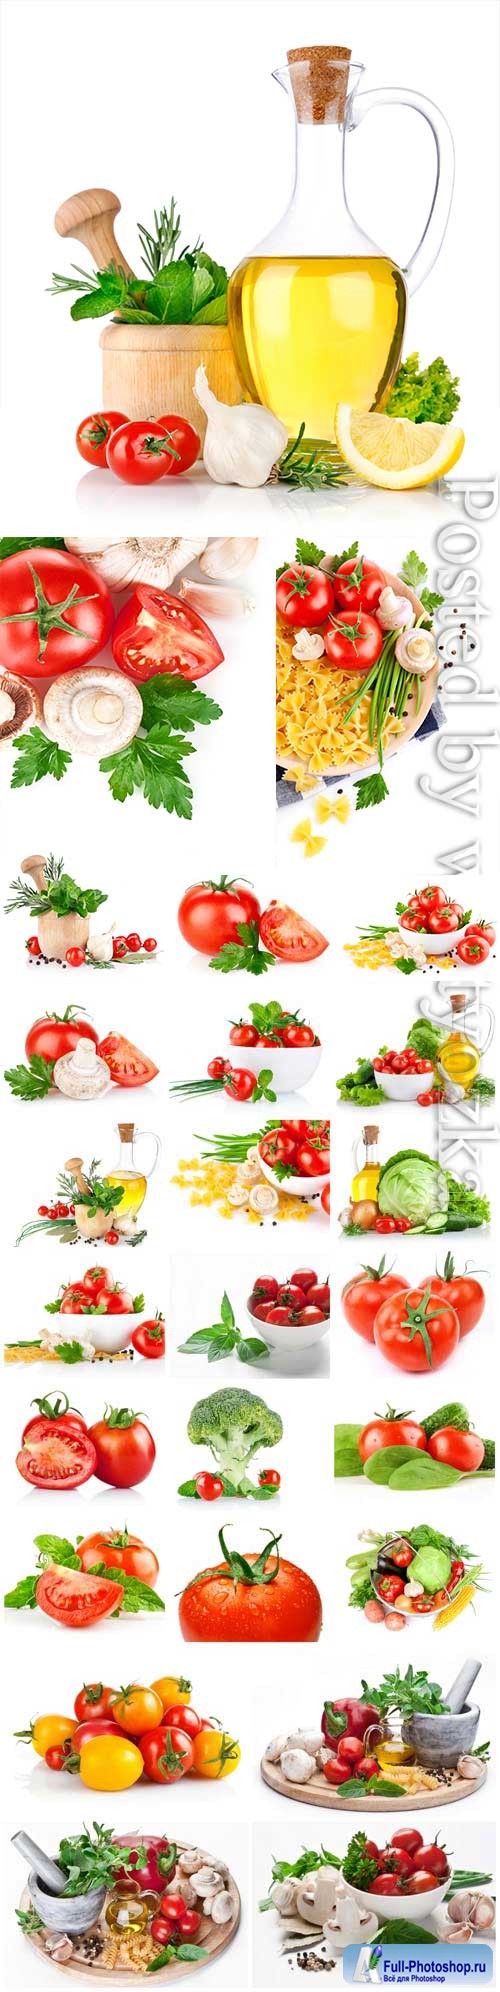 Fresh tomatoes, herbs, spices and oil stock photo